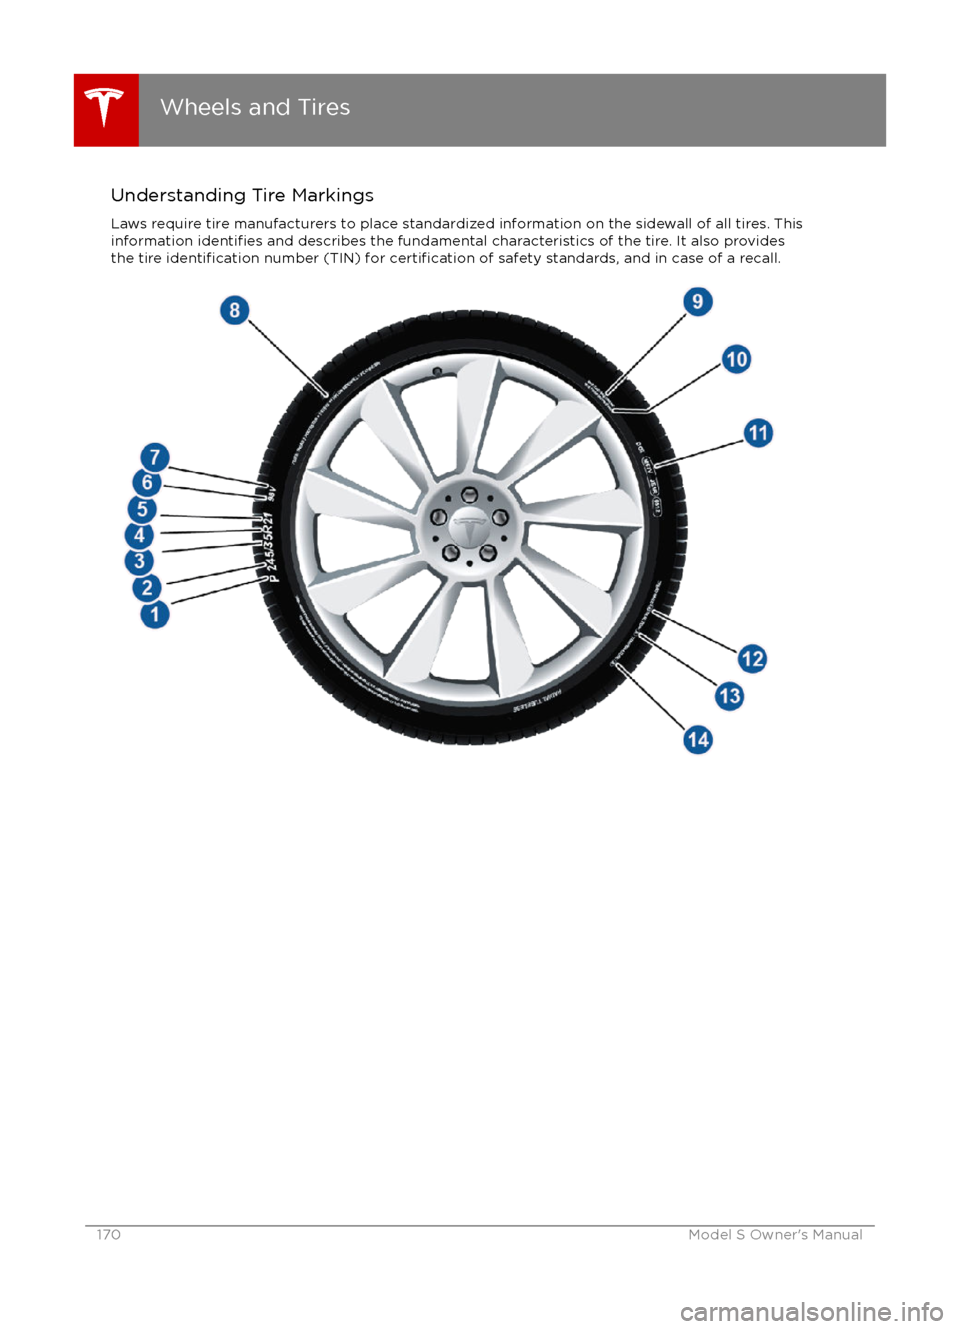 TESLA MODEL S 2016  Owners Manual Understanding Tire MarkingsLaws require tire manufacturers to place standardized information on the sidewall of all tires. This
information 
identifies and describes the fundamental characteristics of